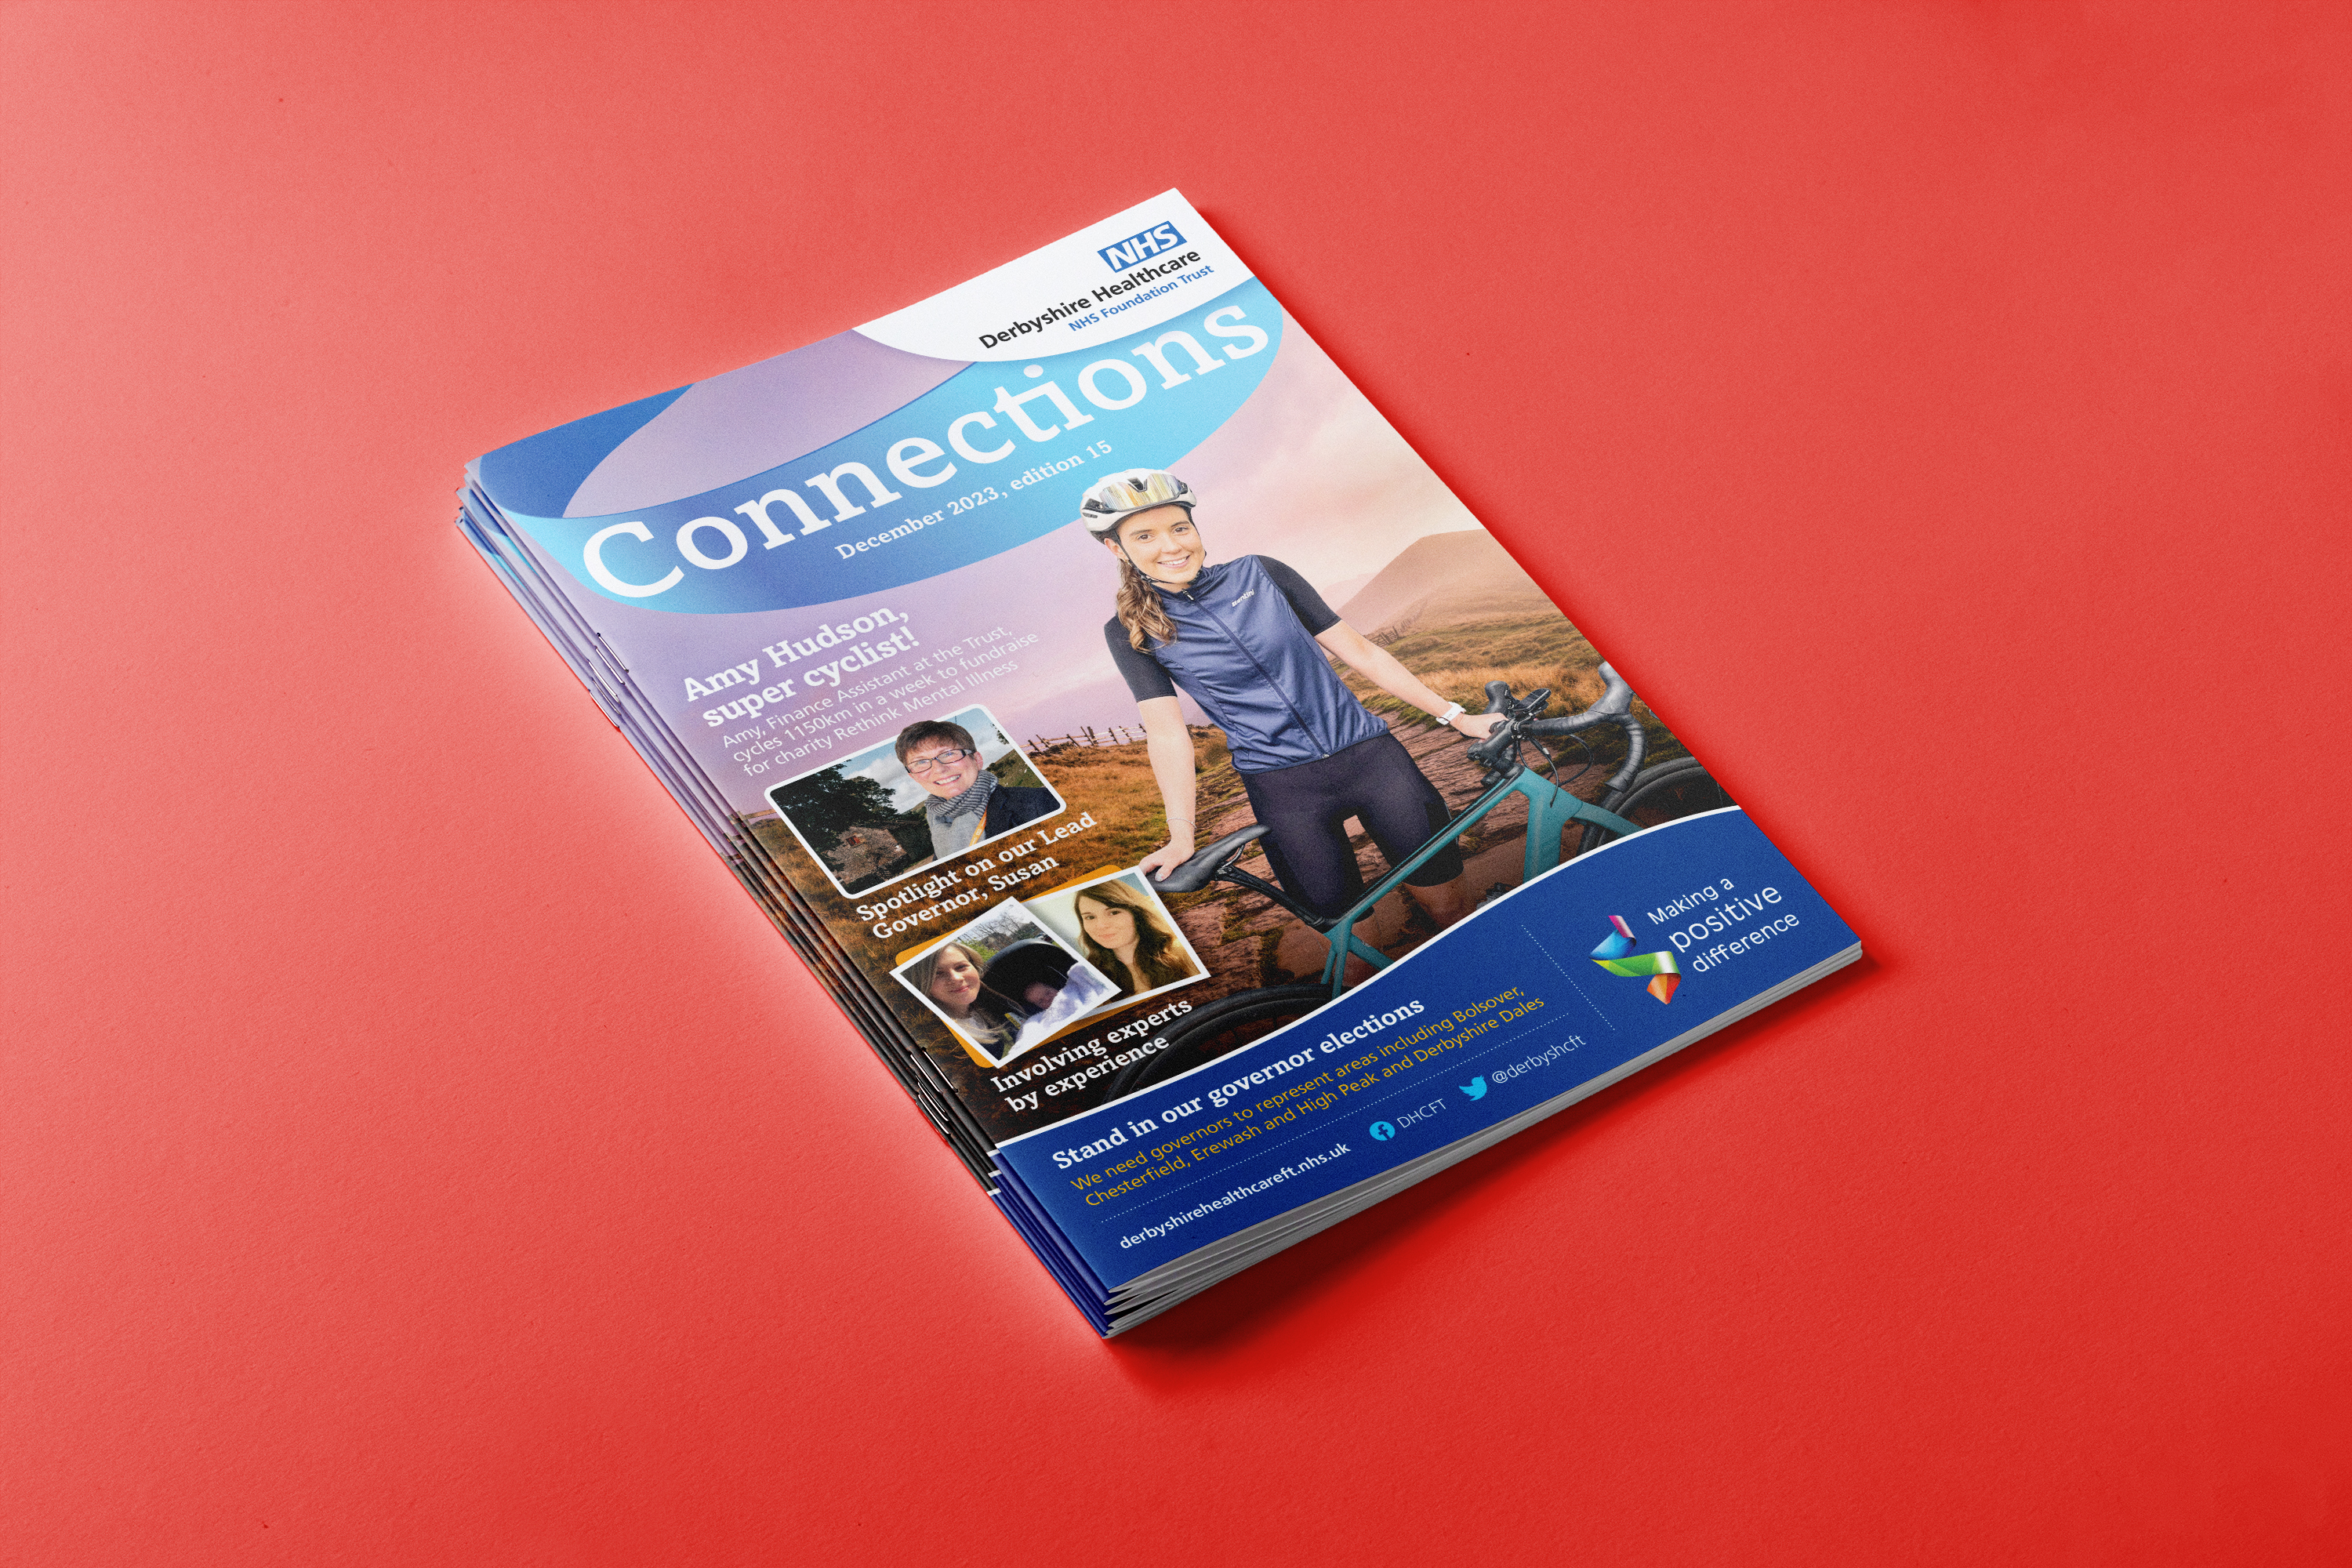 Latest edition of connections magazine is out now!